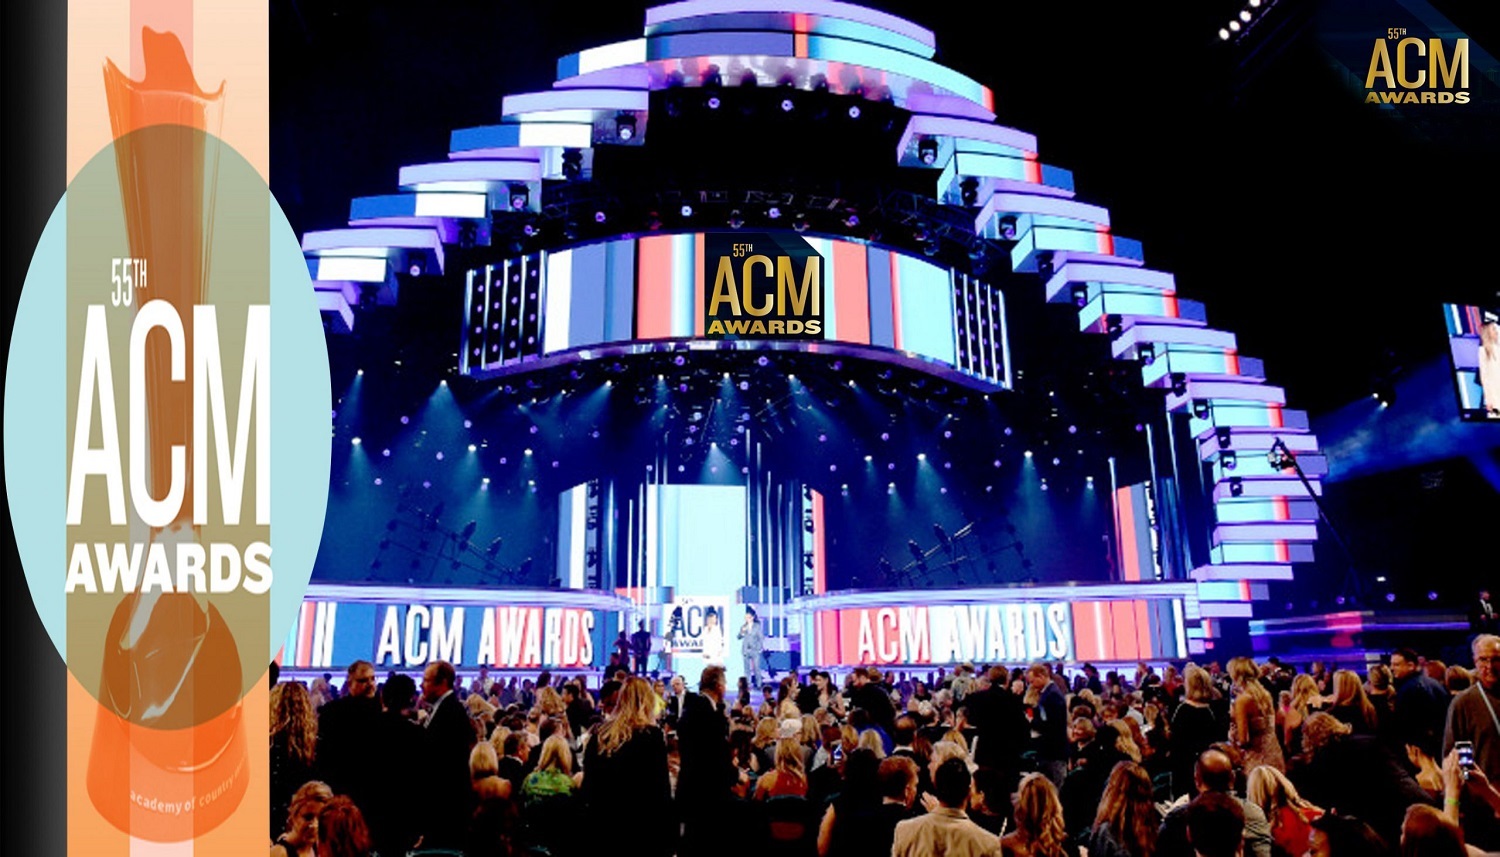 ACM Awards 2020 Live Stream in hd Red Carpet News online New York